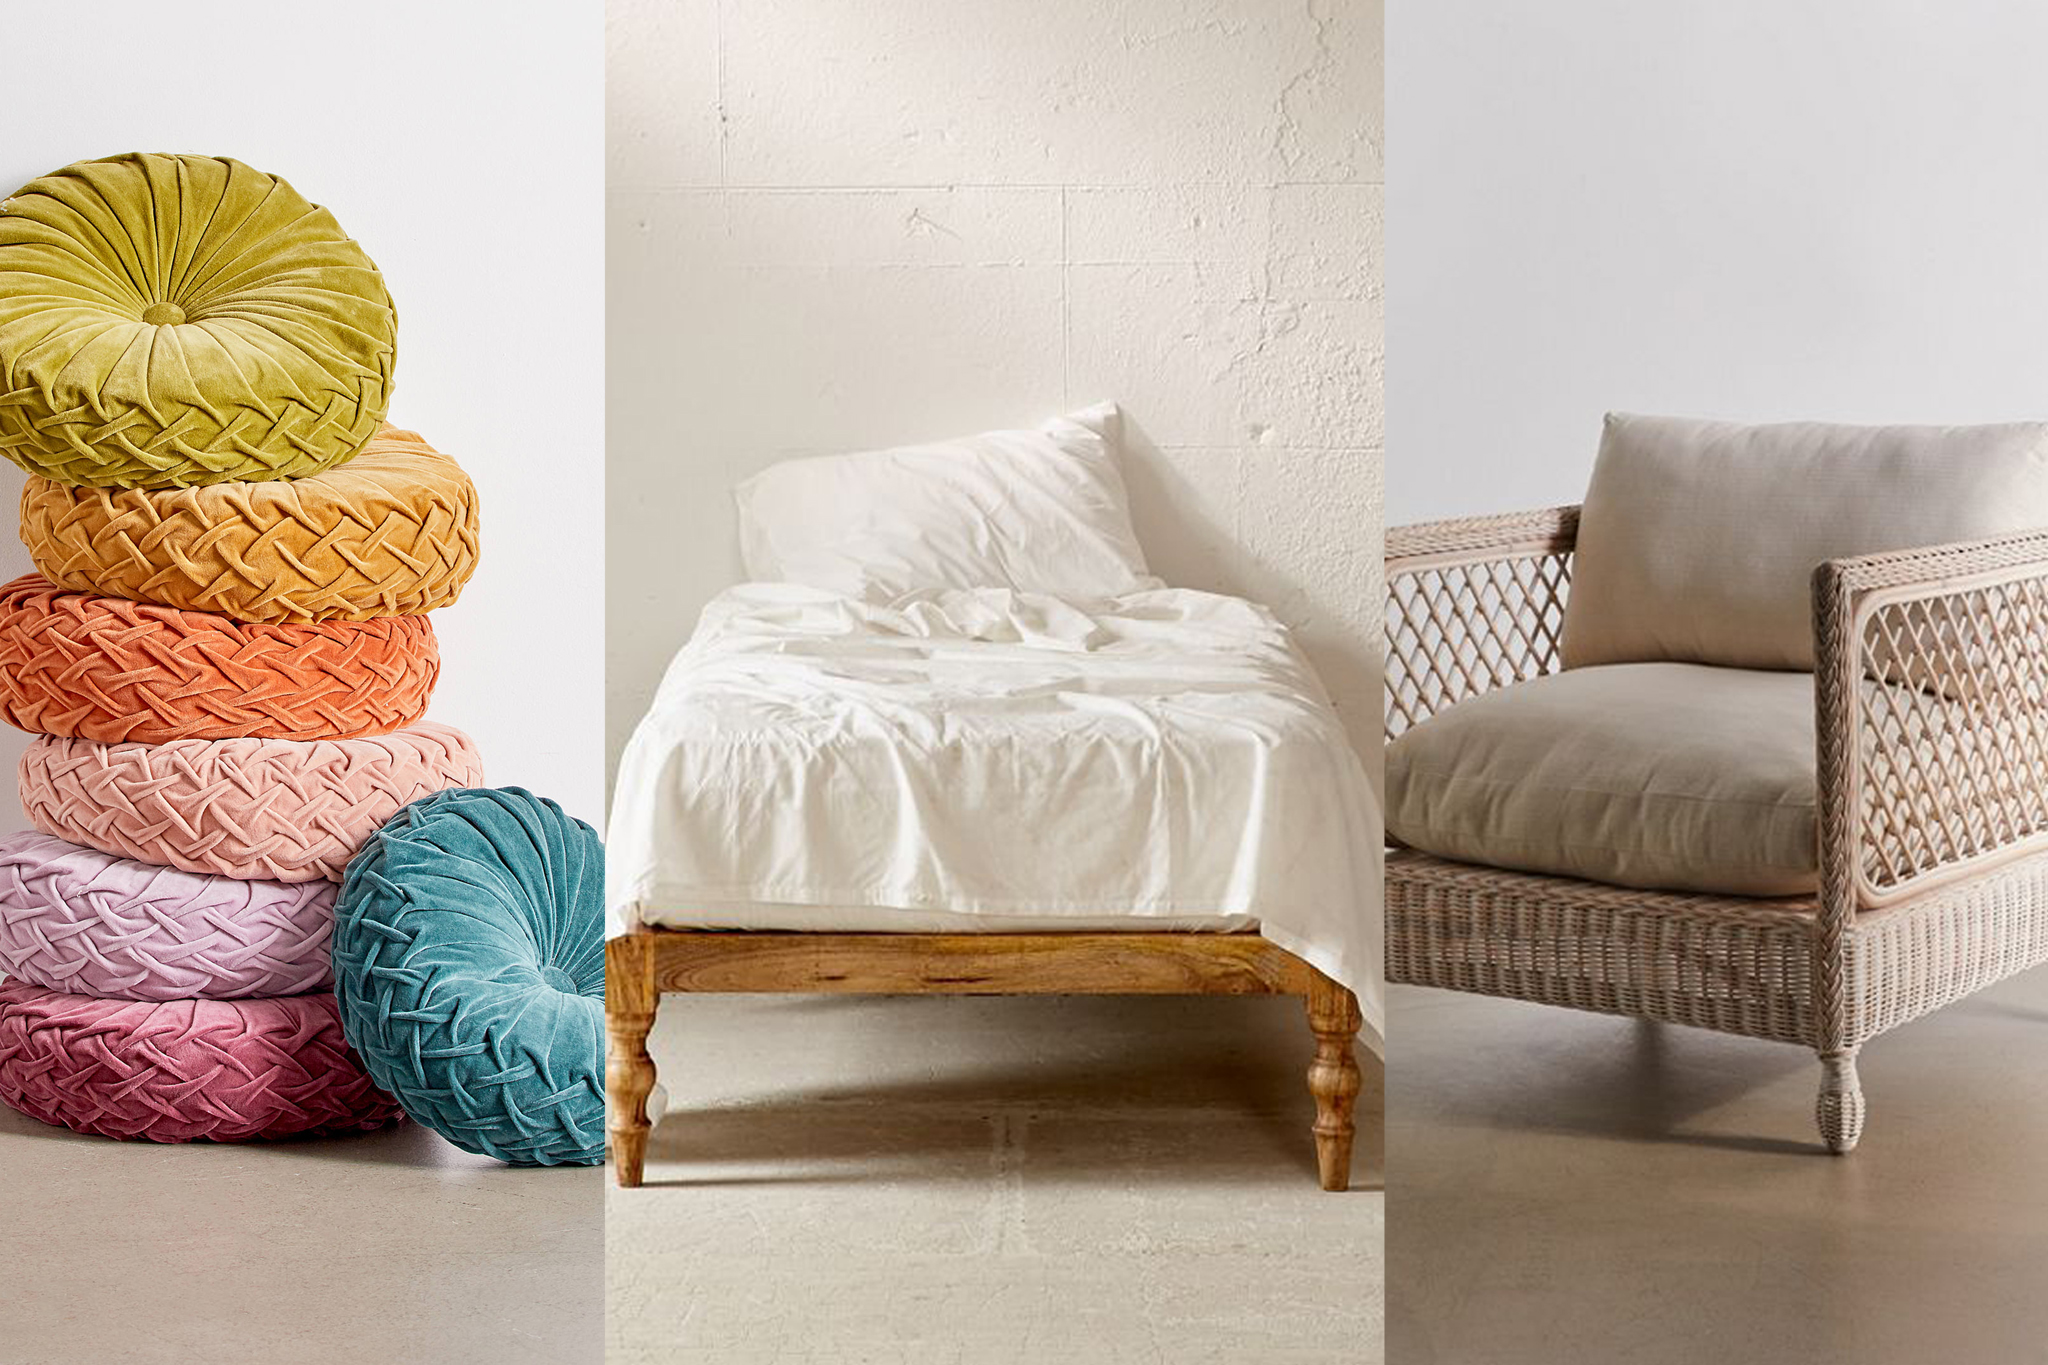 The Urban Outfitters Home Sale Is Full Of Twee Delight